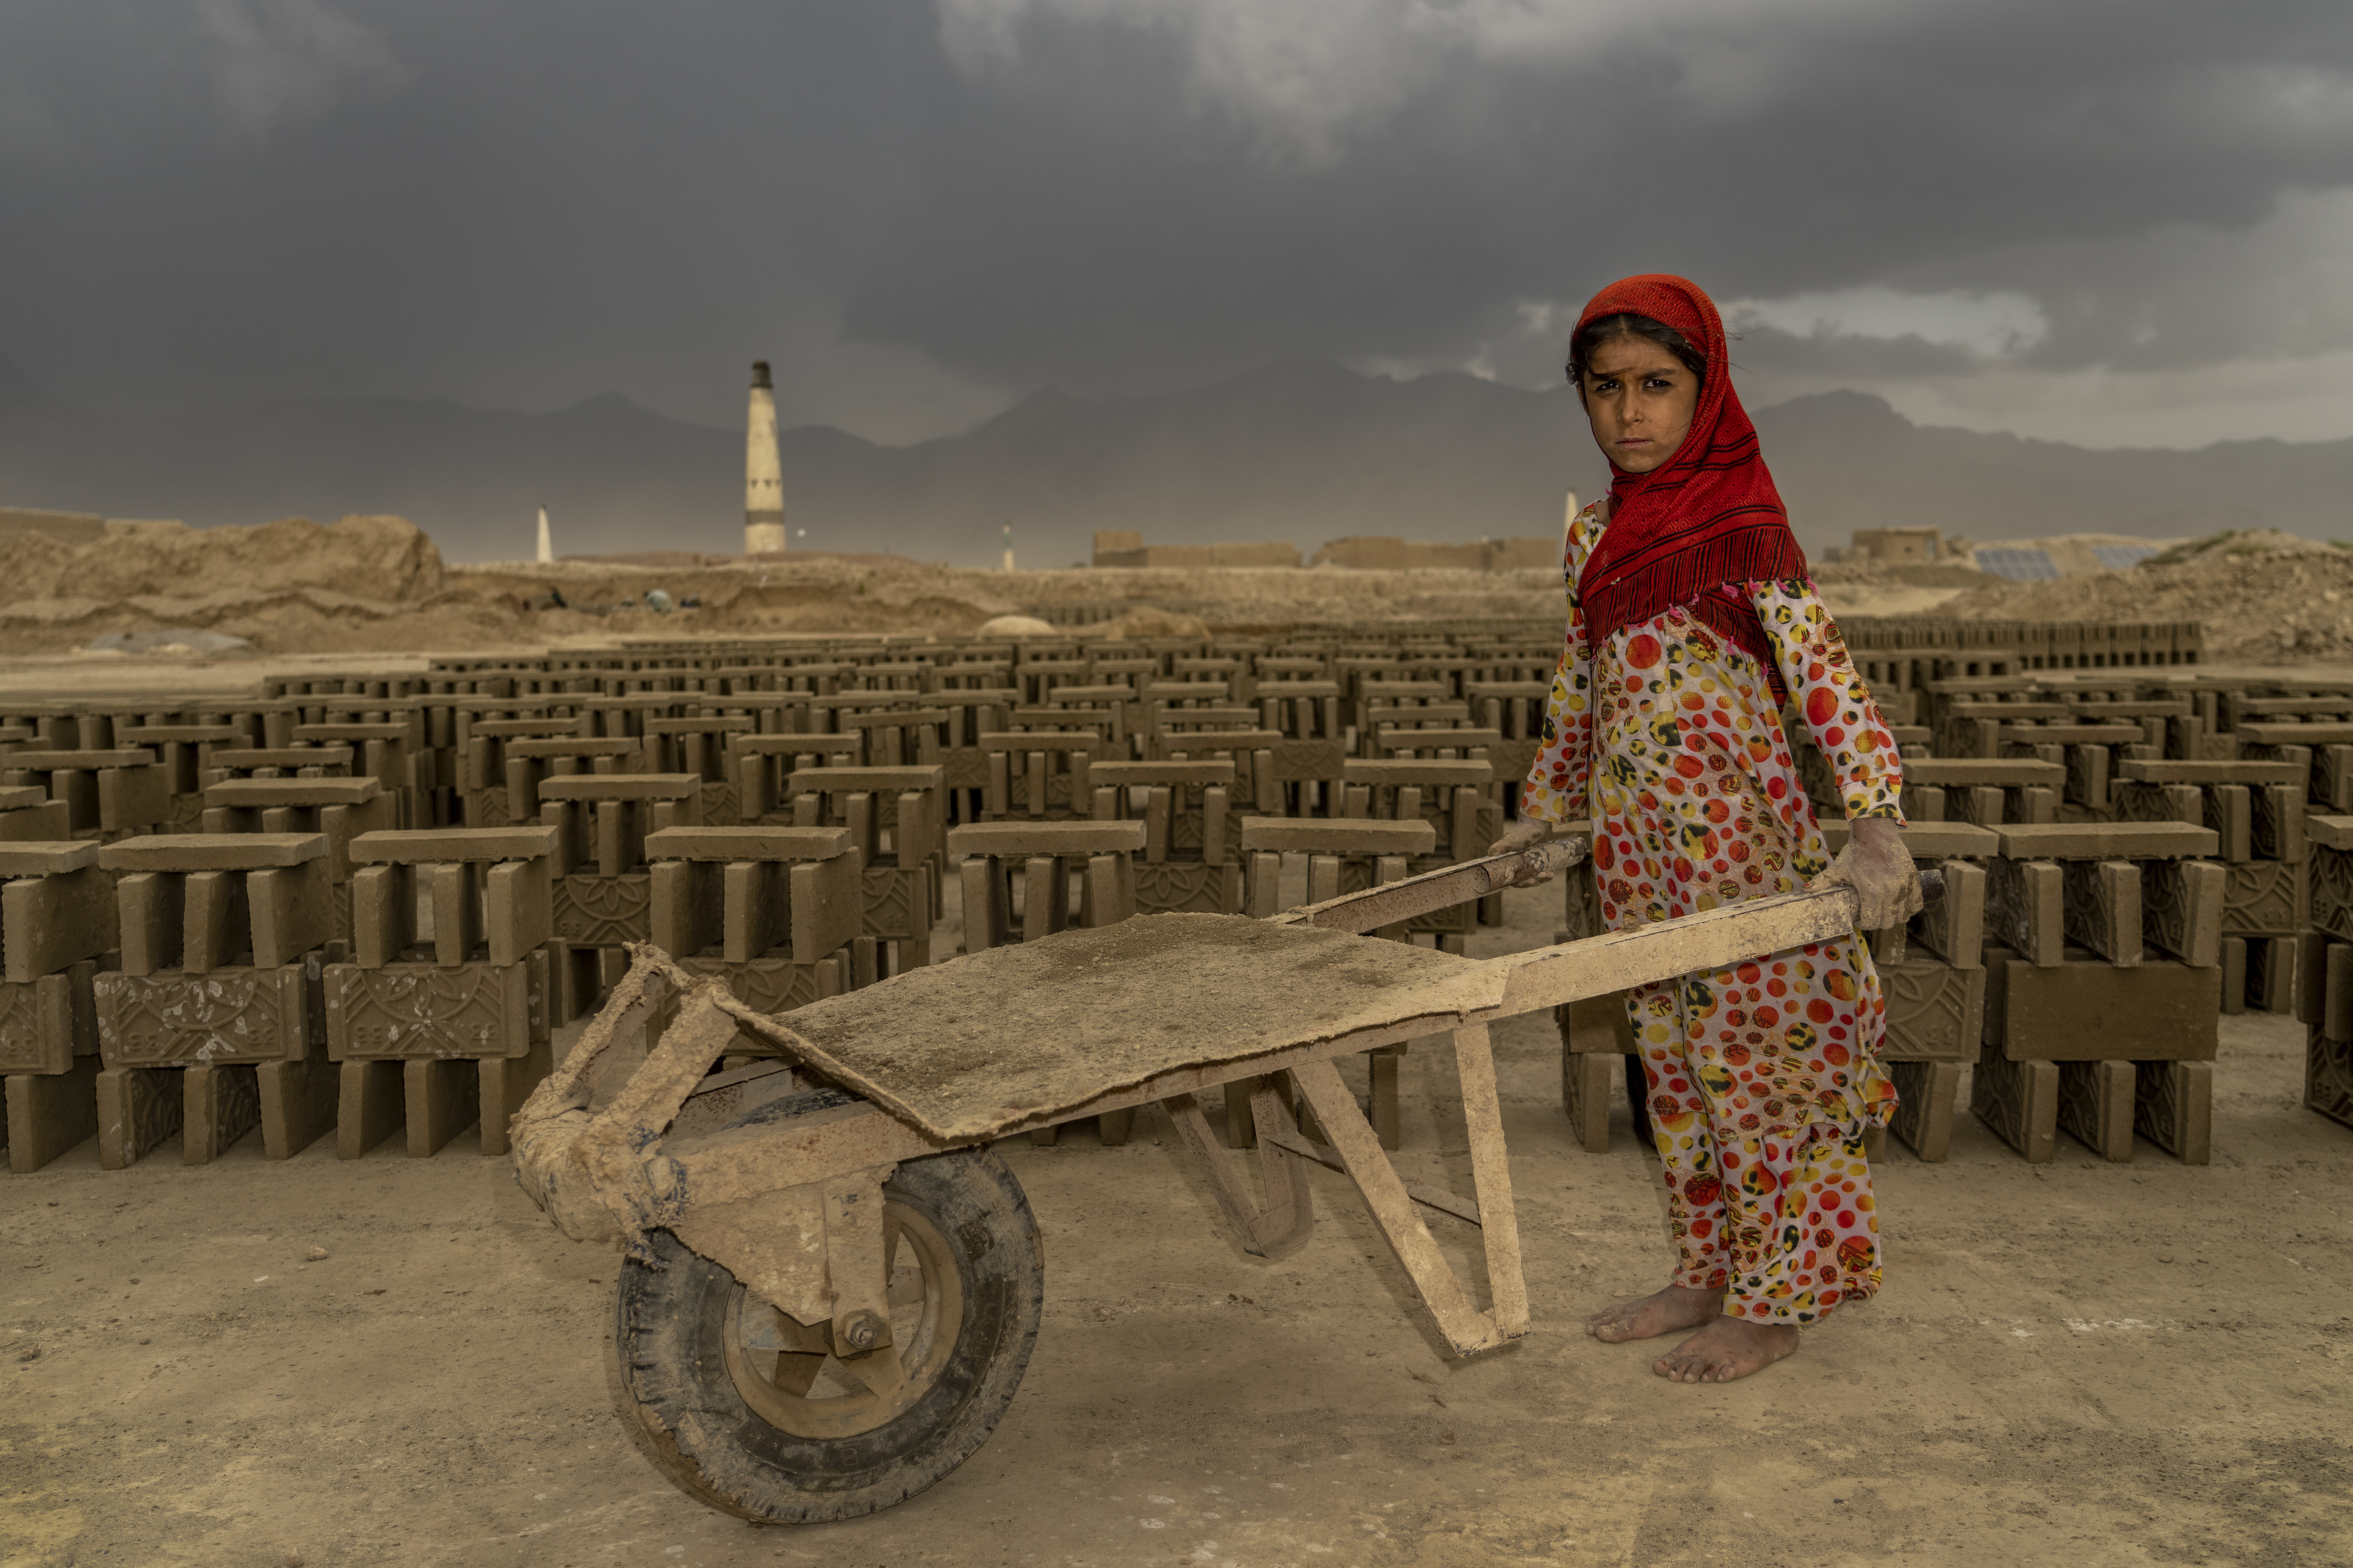 A 9-year-old Afghan girl works in a brick factory on the outskirts of Kabul.